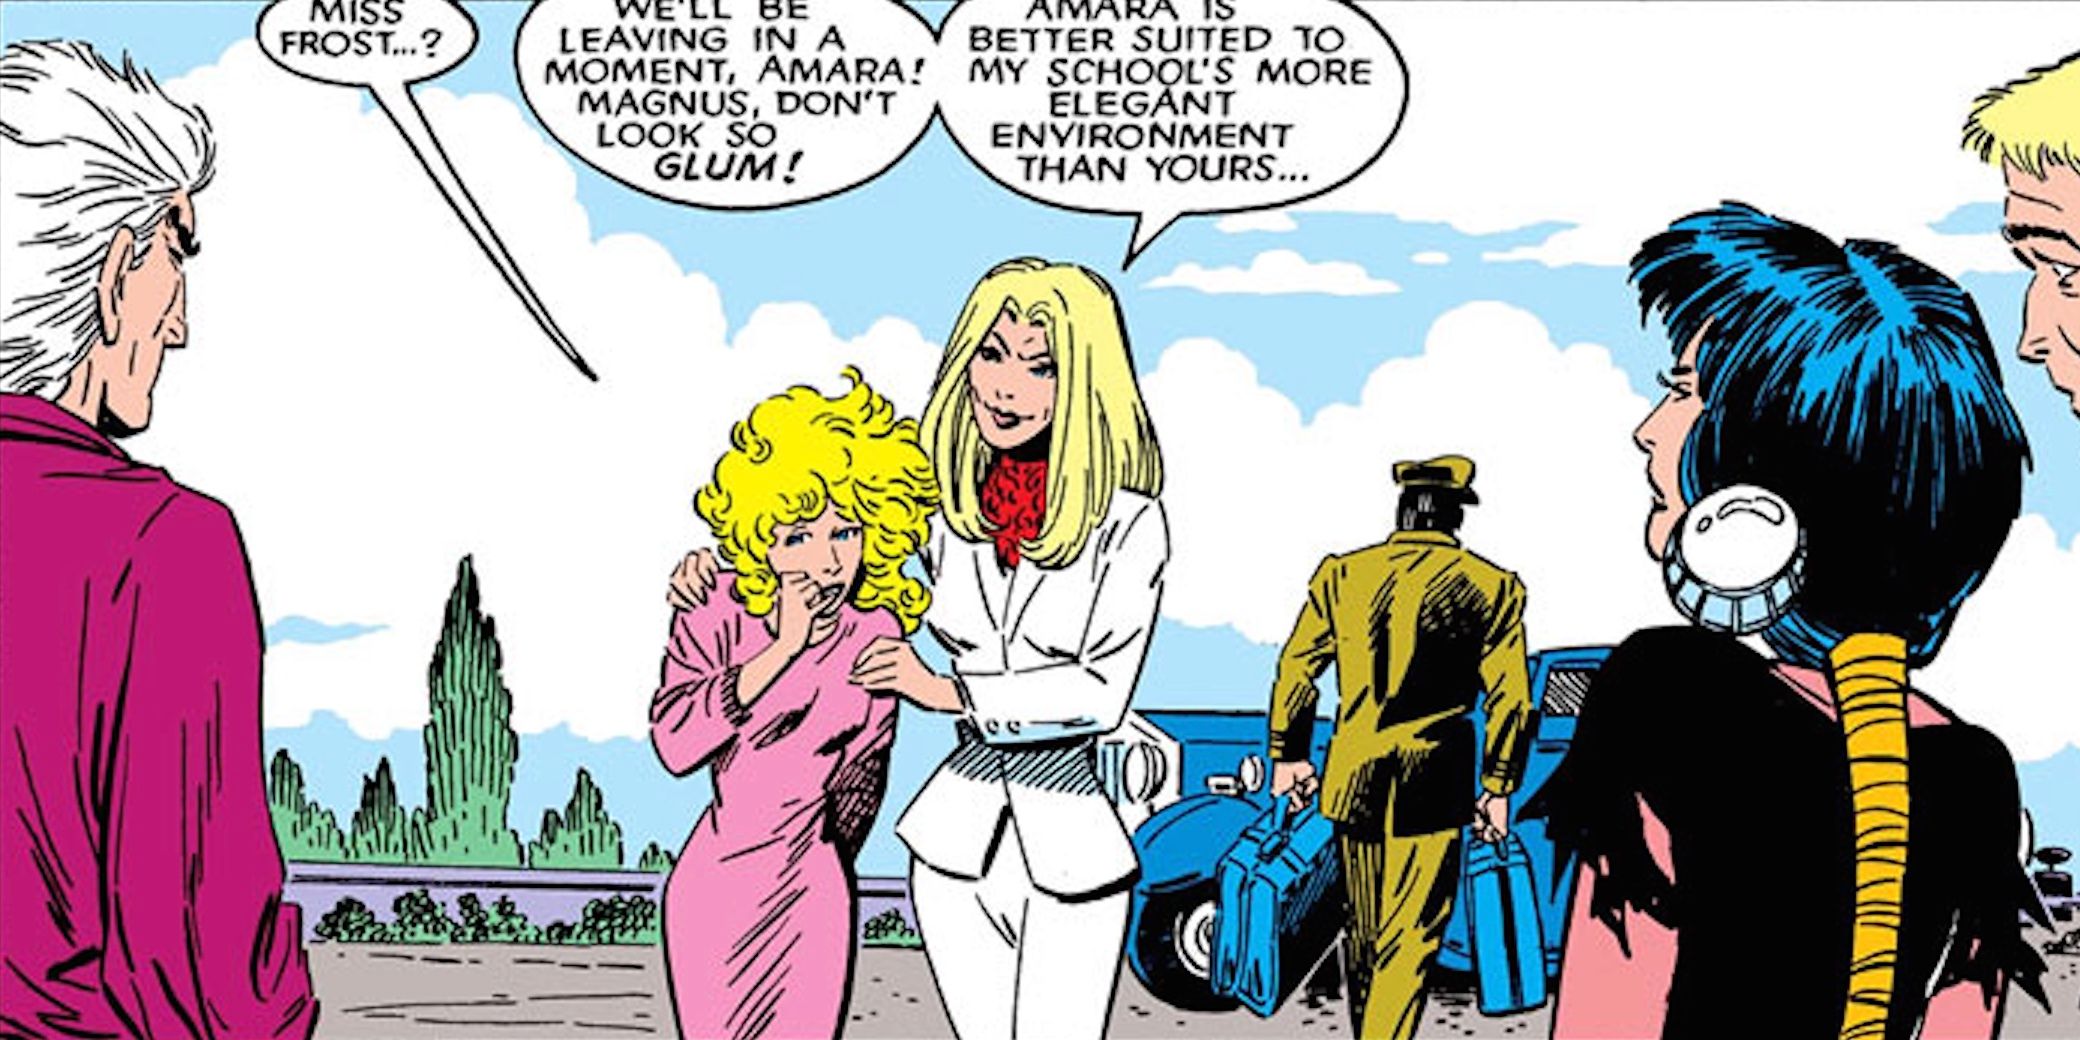 Emma Frost Takes New Mutants To Her School